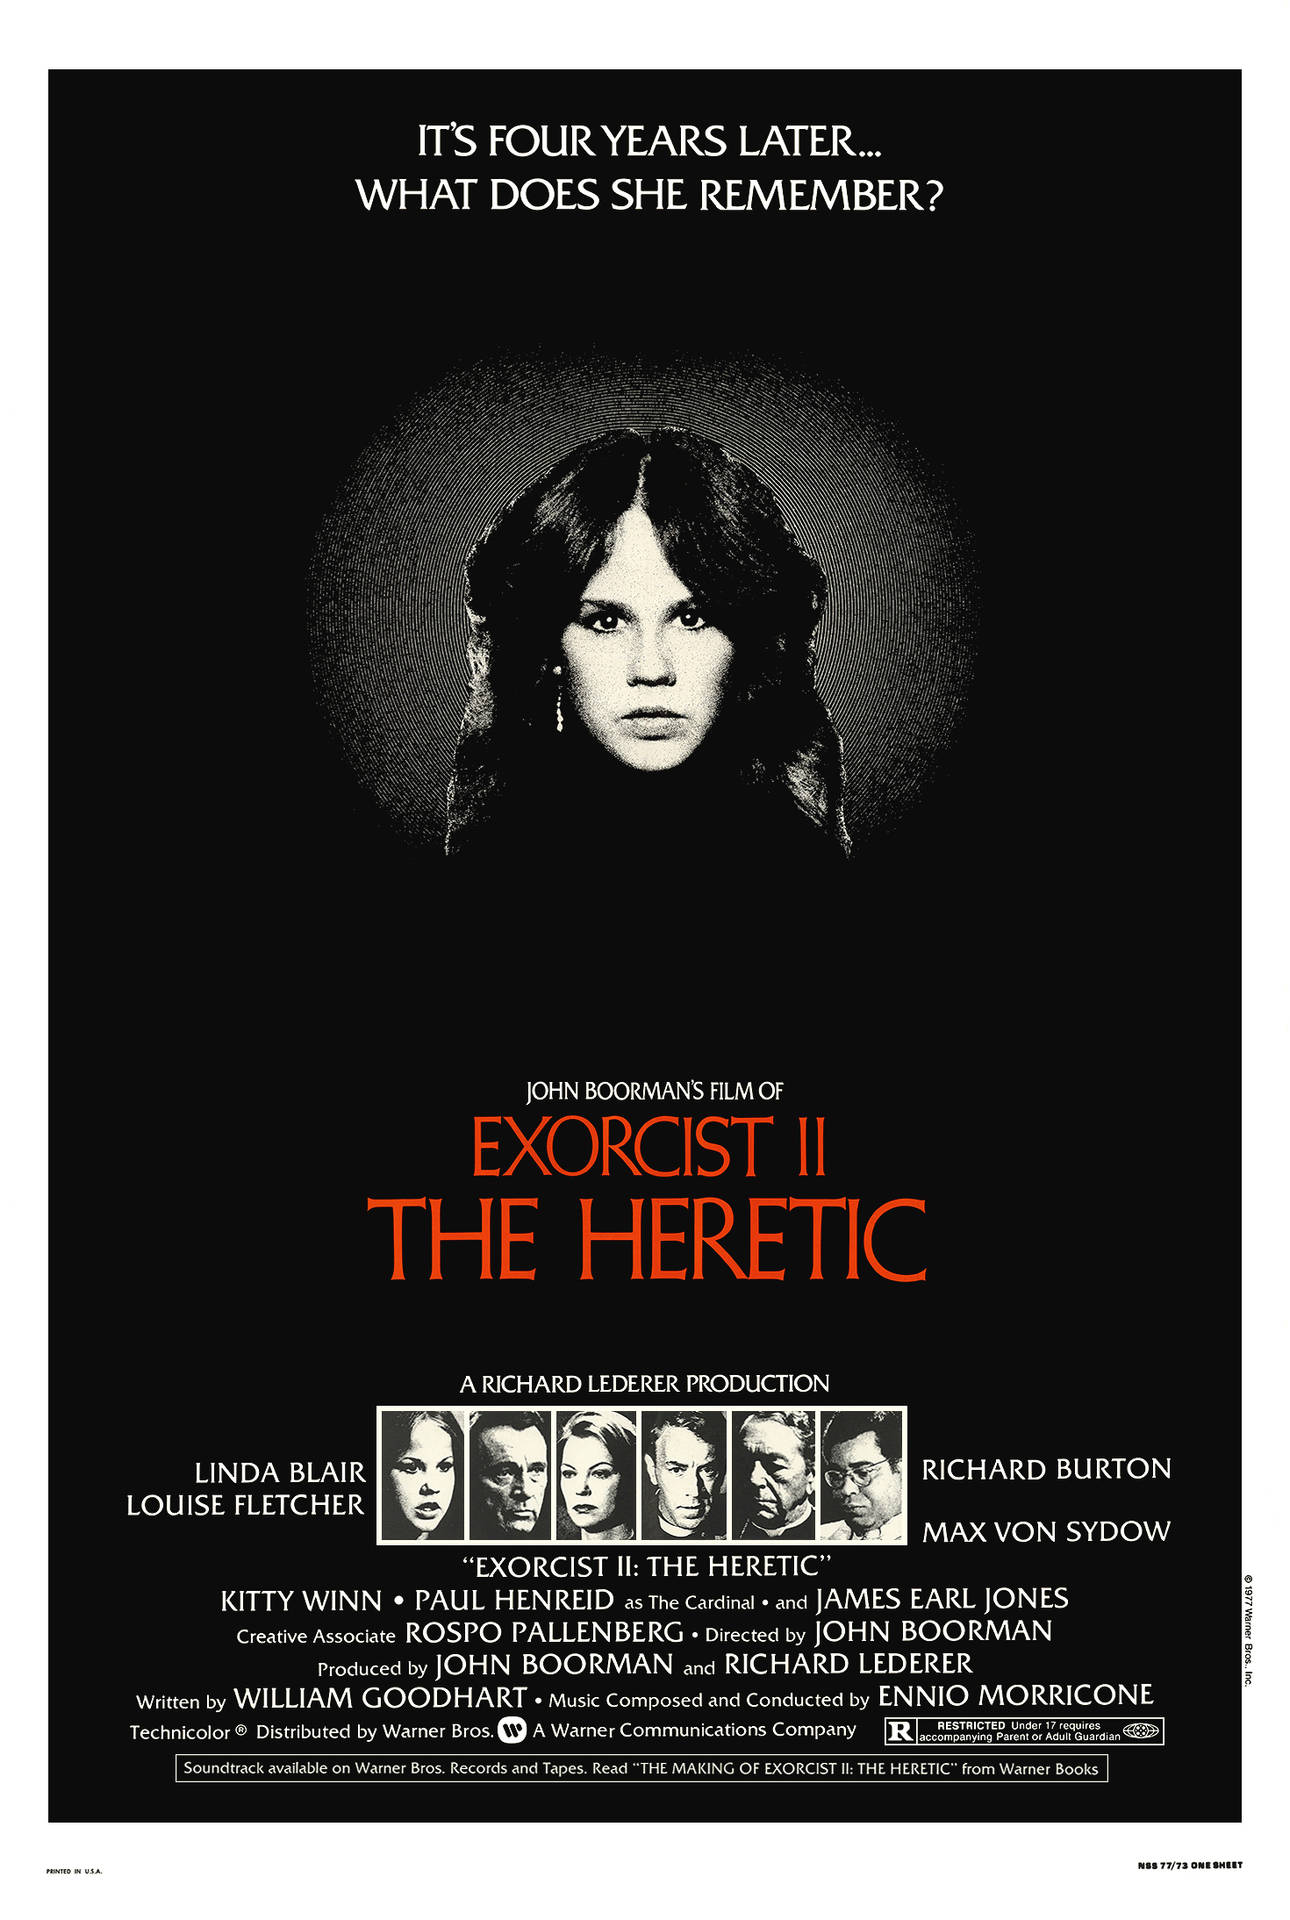 The Exorcist The Heretic Background